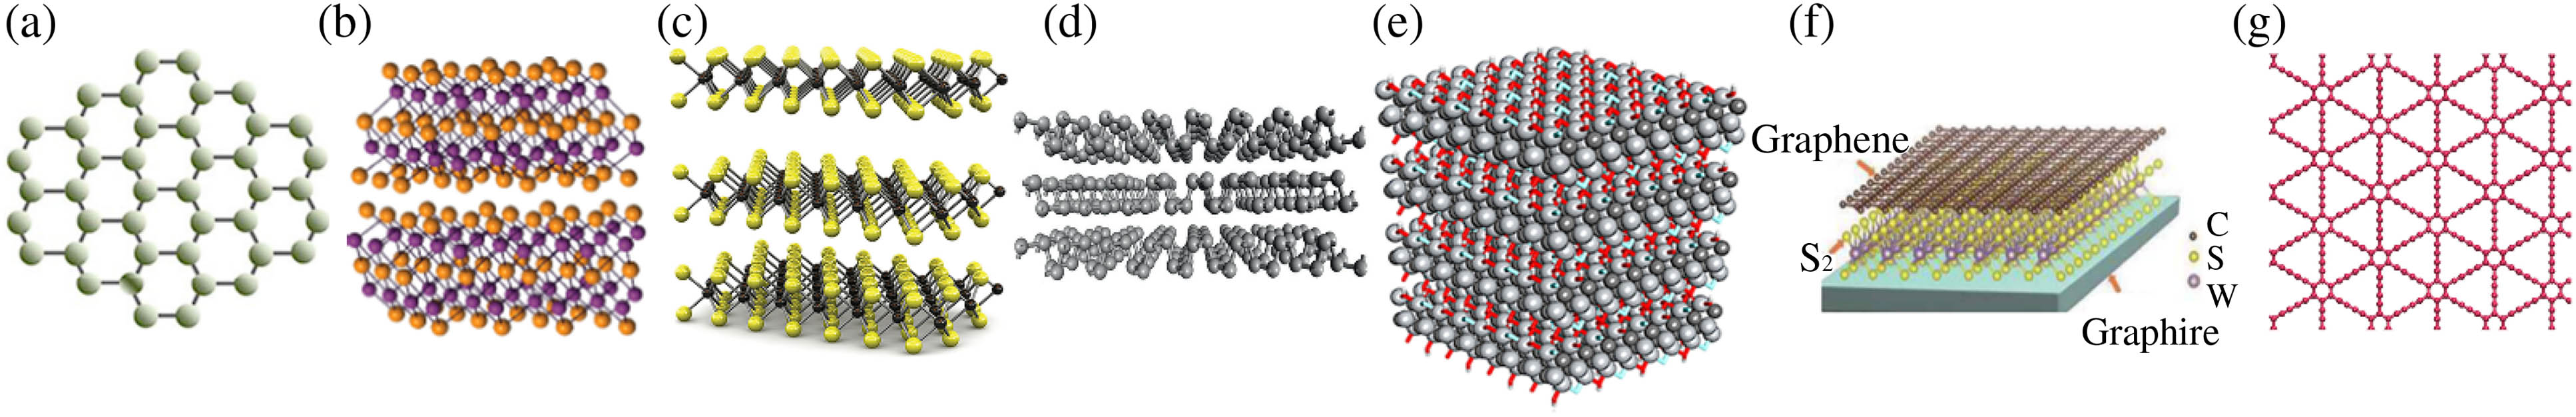 Atomic structures of 2D materials. (a) Graphene; (b) TIs; (c) TMDs; (d) BP; (e) MXenes; (f) heterostructures; (g) graphdiyne; (a) Reprinted from Ref. [19], copyright 2020, IEEE; (b) reprinted from Ref. [20], copyright 2012, American Chemical Society; (c) reprinted from Ref. [21], copyright 2019, AIP Publishing; (d) reprinted from Ref. [22], copyright 2012, Wiley; (e) reprinted from Ref. [23], copyright 2021, De Gruyter; (f) reprinted from Ref. [24], copyright 2017, Chinese Laser Press; (g) reprinted from Ref. [25], copyright 2016, Springer Nature.